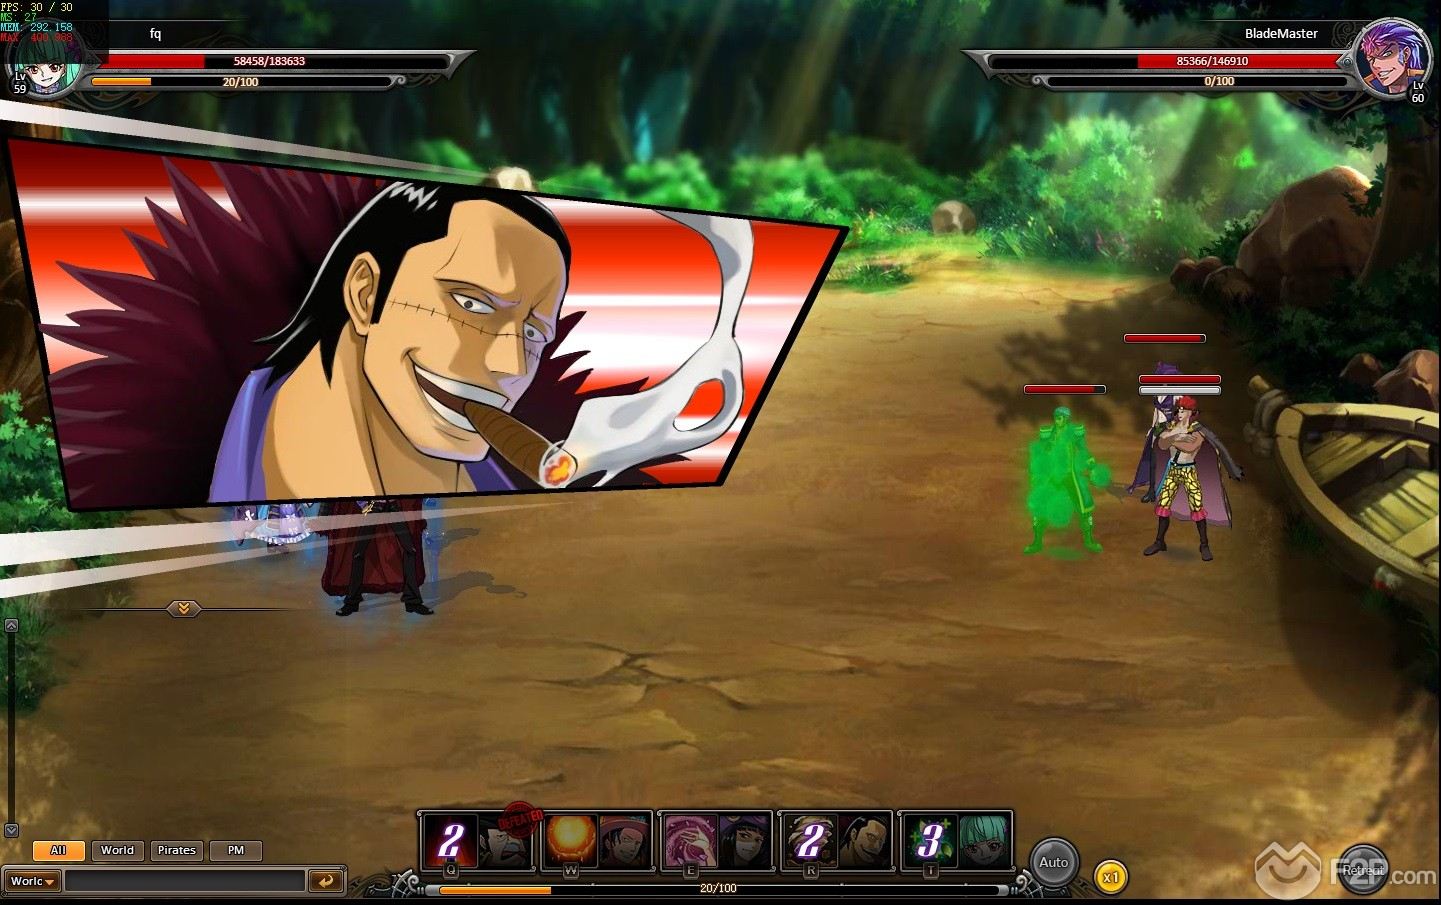 One Piece Online 2 game: OP2 March on Impel Down G video - Pirate King -  JoyGames - Indie DB